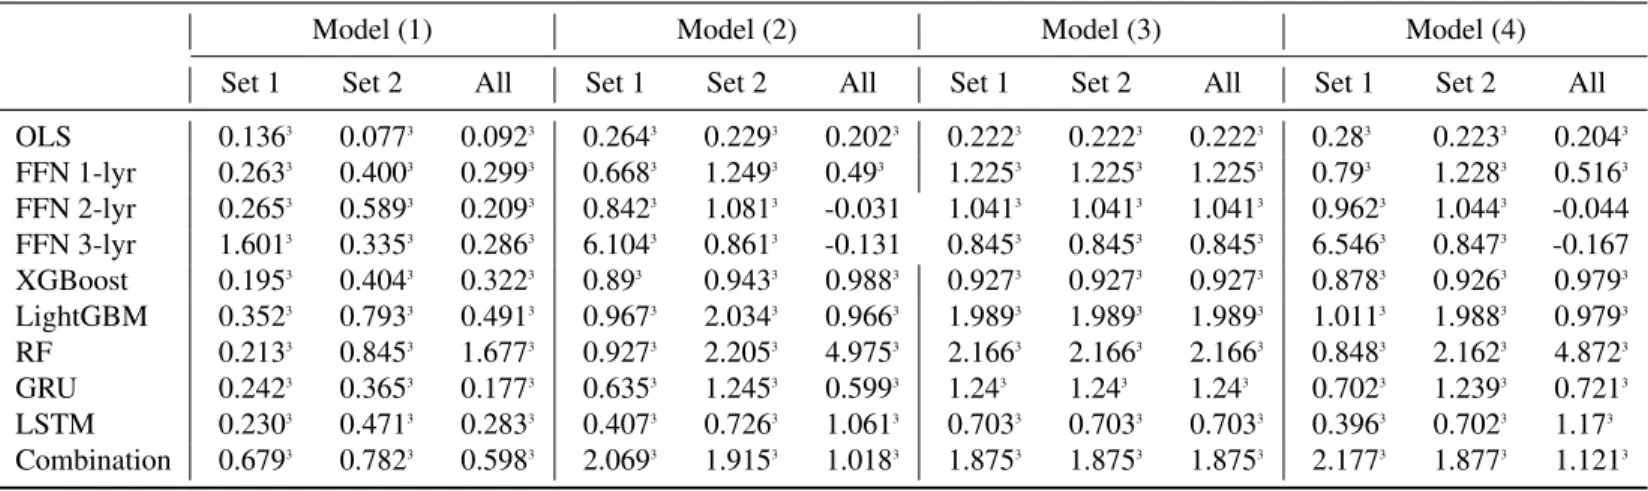 Table 6: Cross-sectional regressions